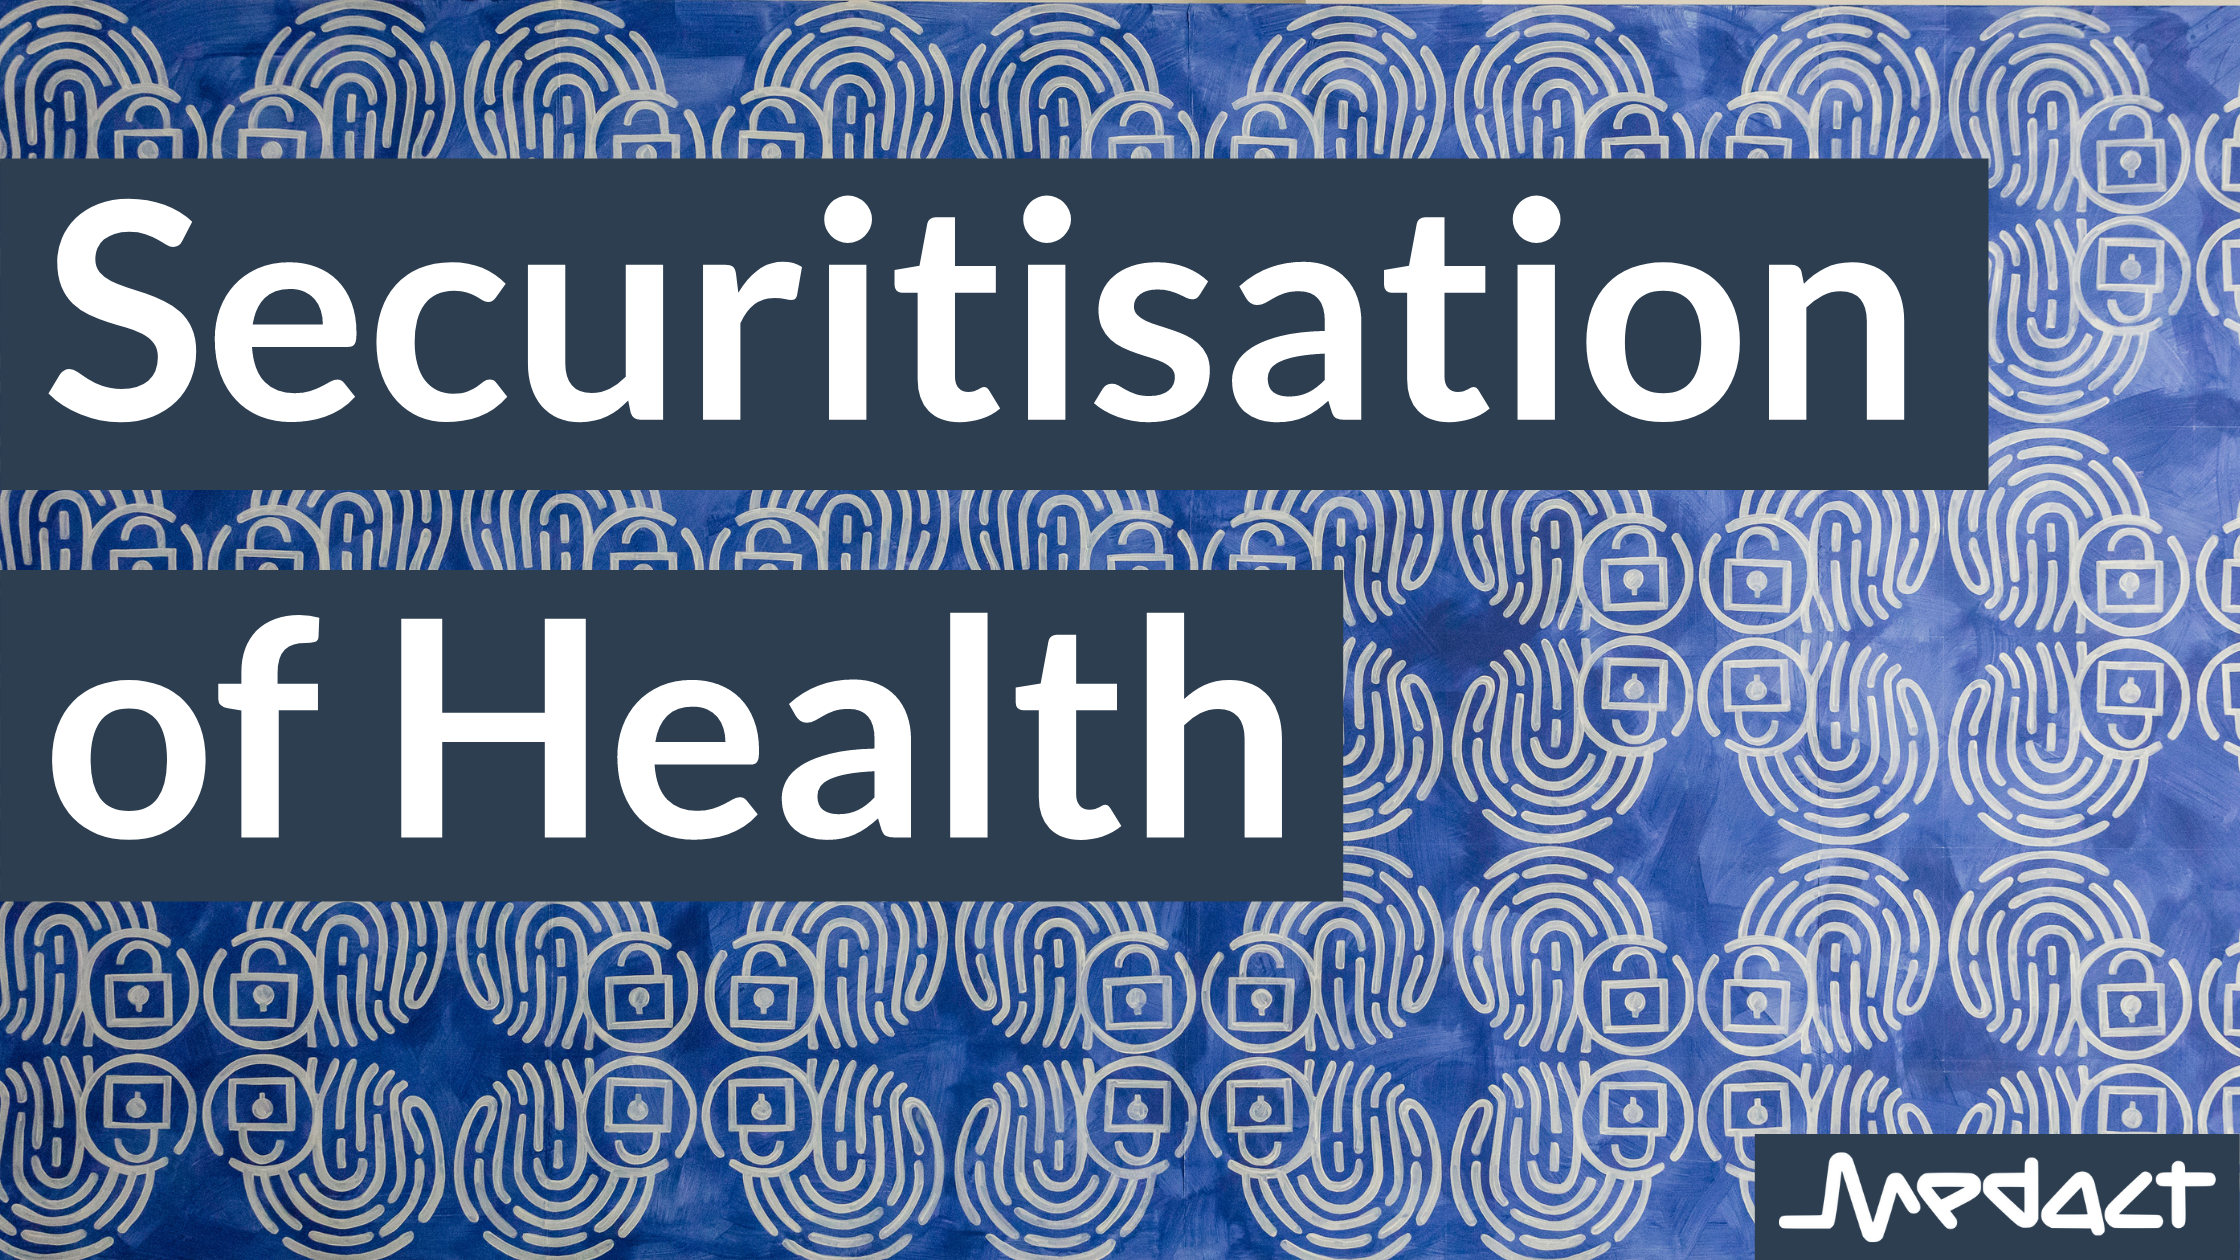 Securitisation of Health group meeting